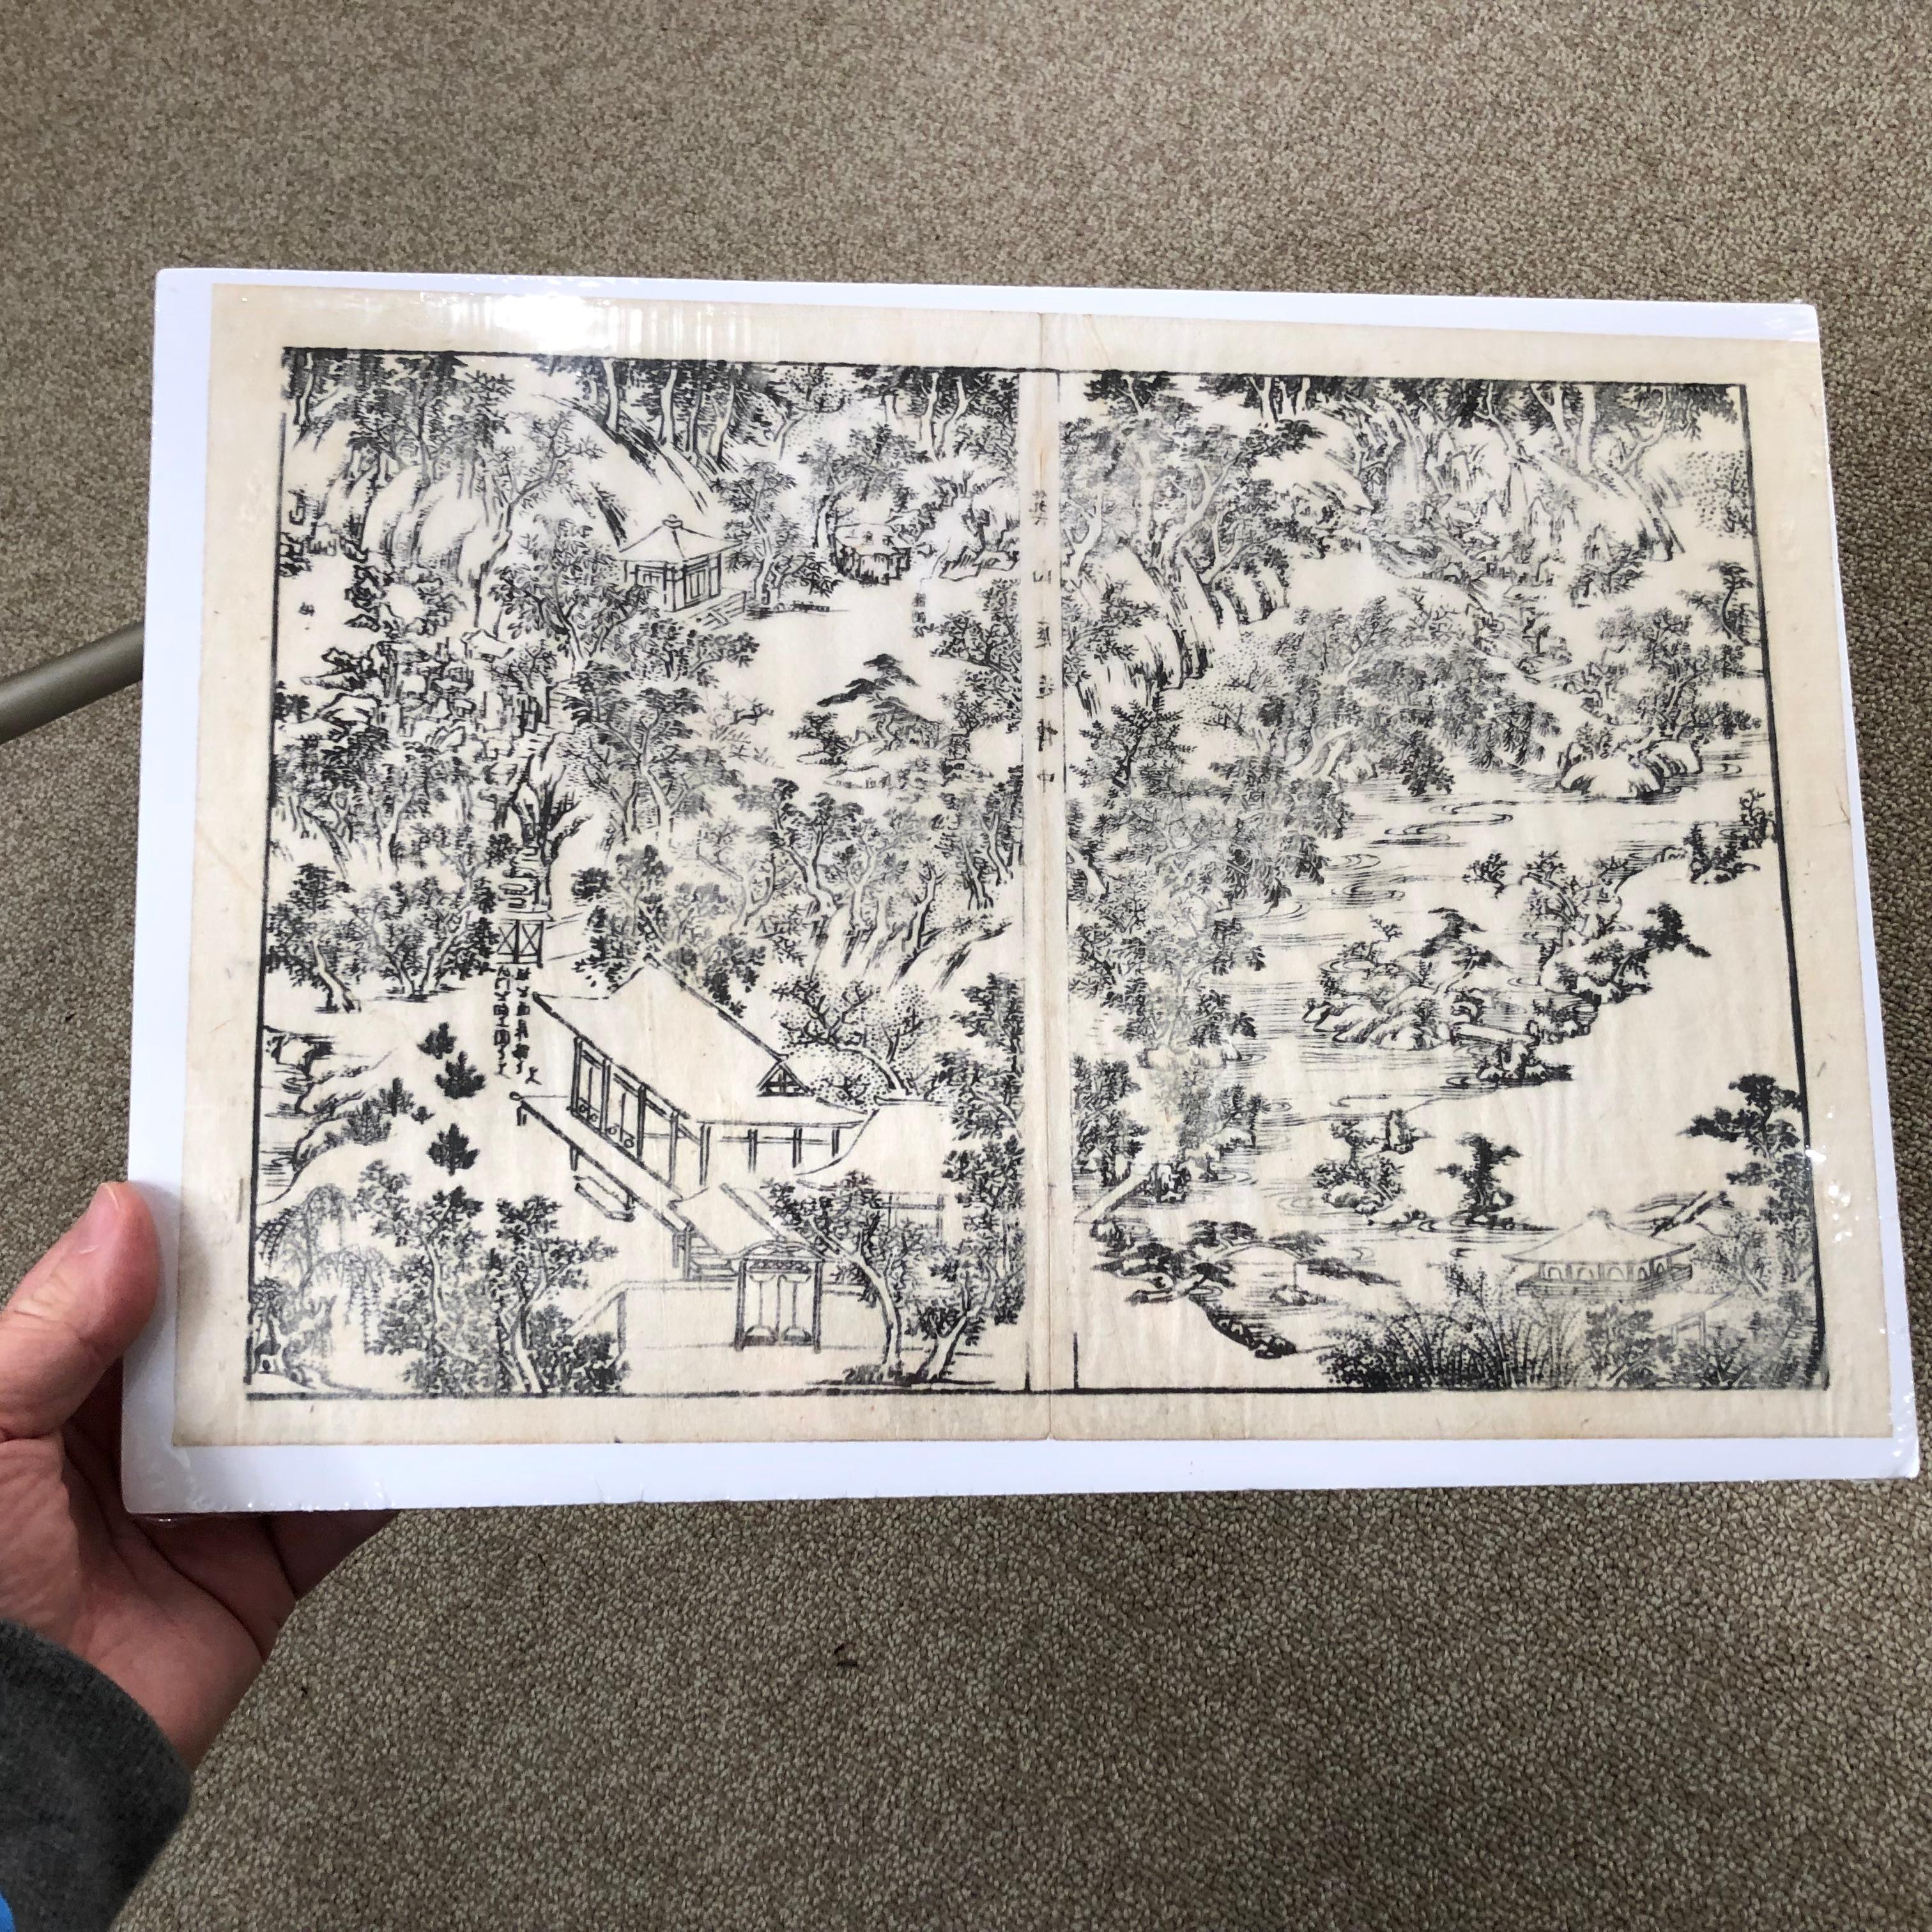 Japan four (4) antique Old Kyoto Garden Woodblock prints from an original book 18th-19th century

Immediately frameable 

Printed on handmade washi rice paper.

Dating to the 18th-19th century and originally found in Tokyo, Japan. 

These